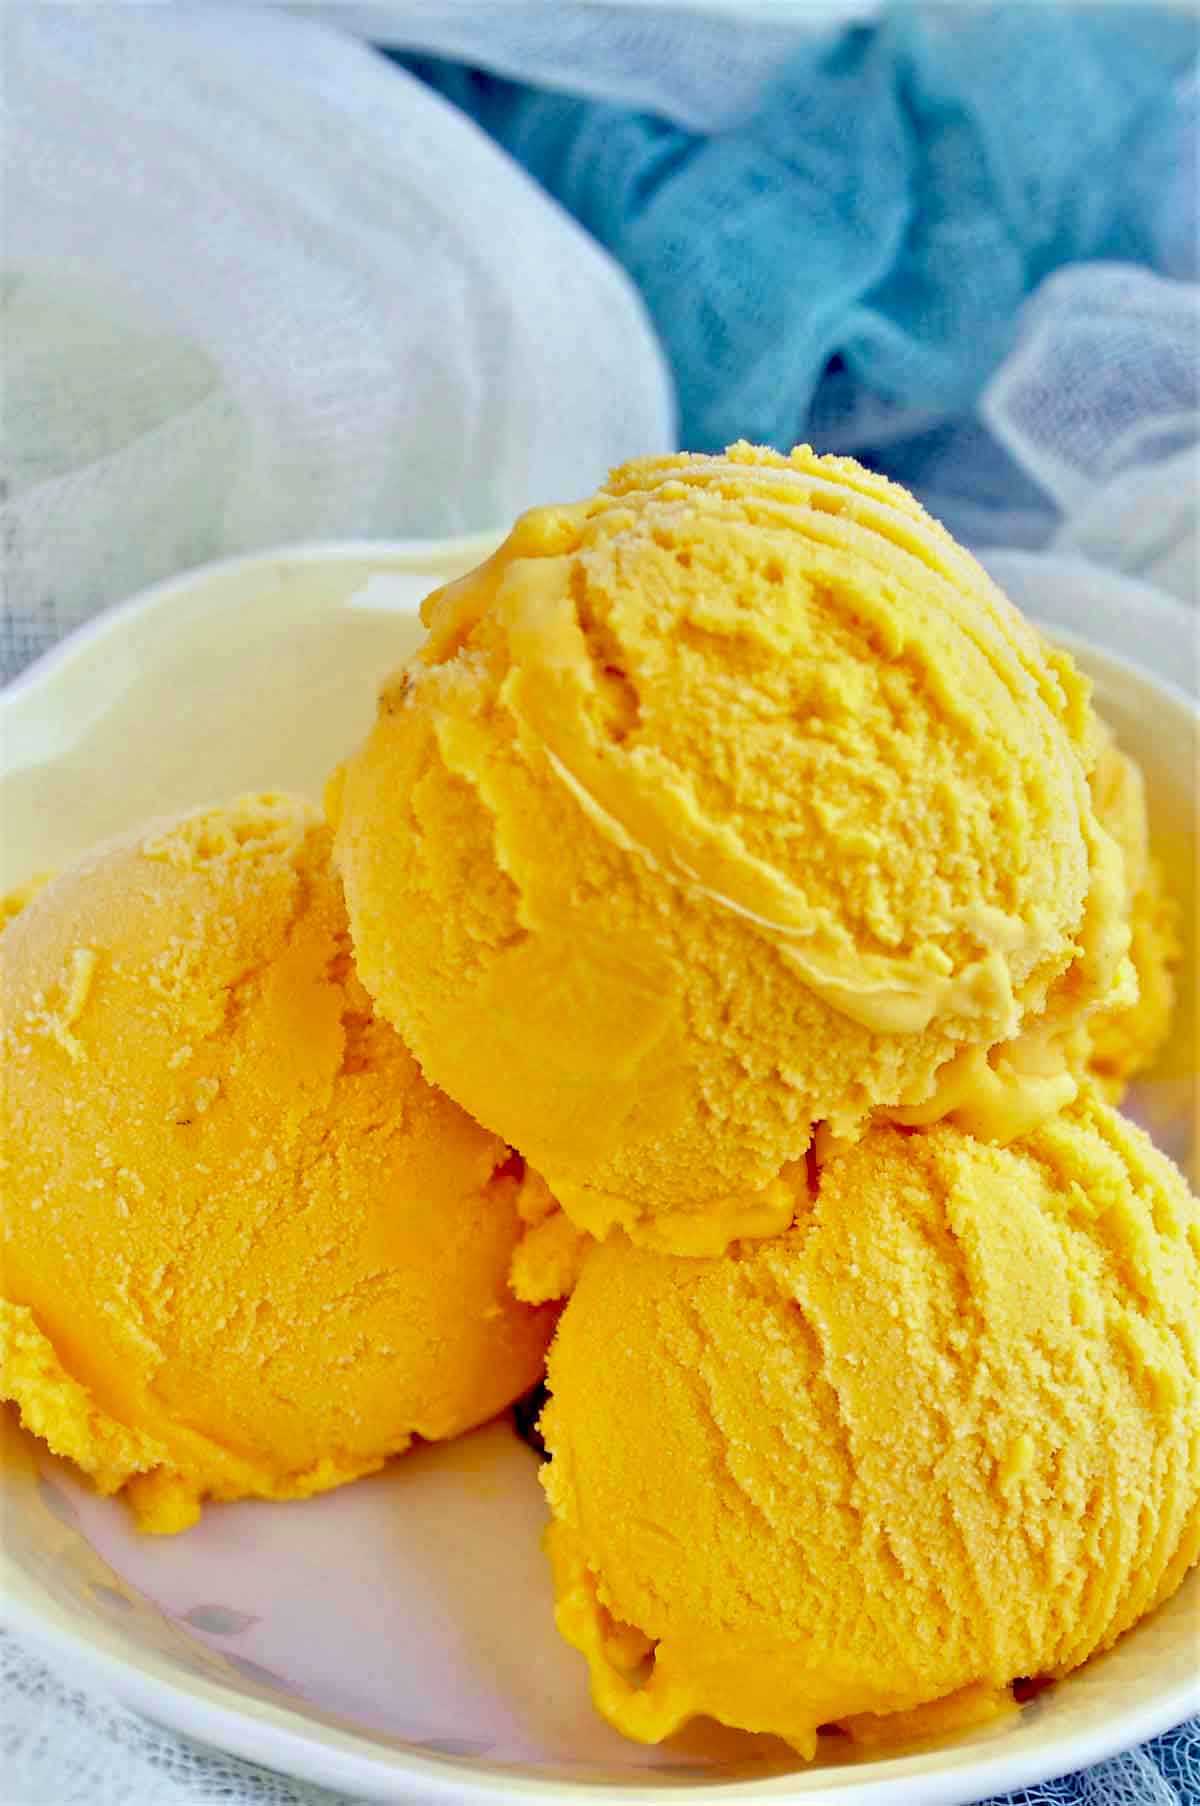 Mango flavor ice cream scoops in a bowl.